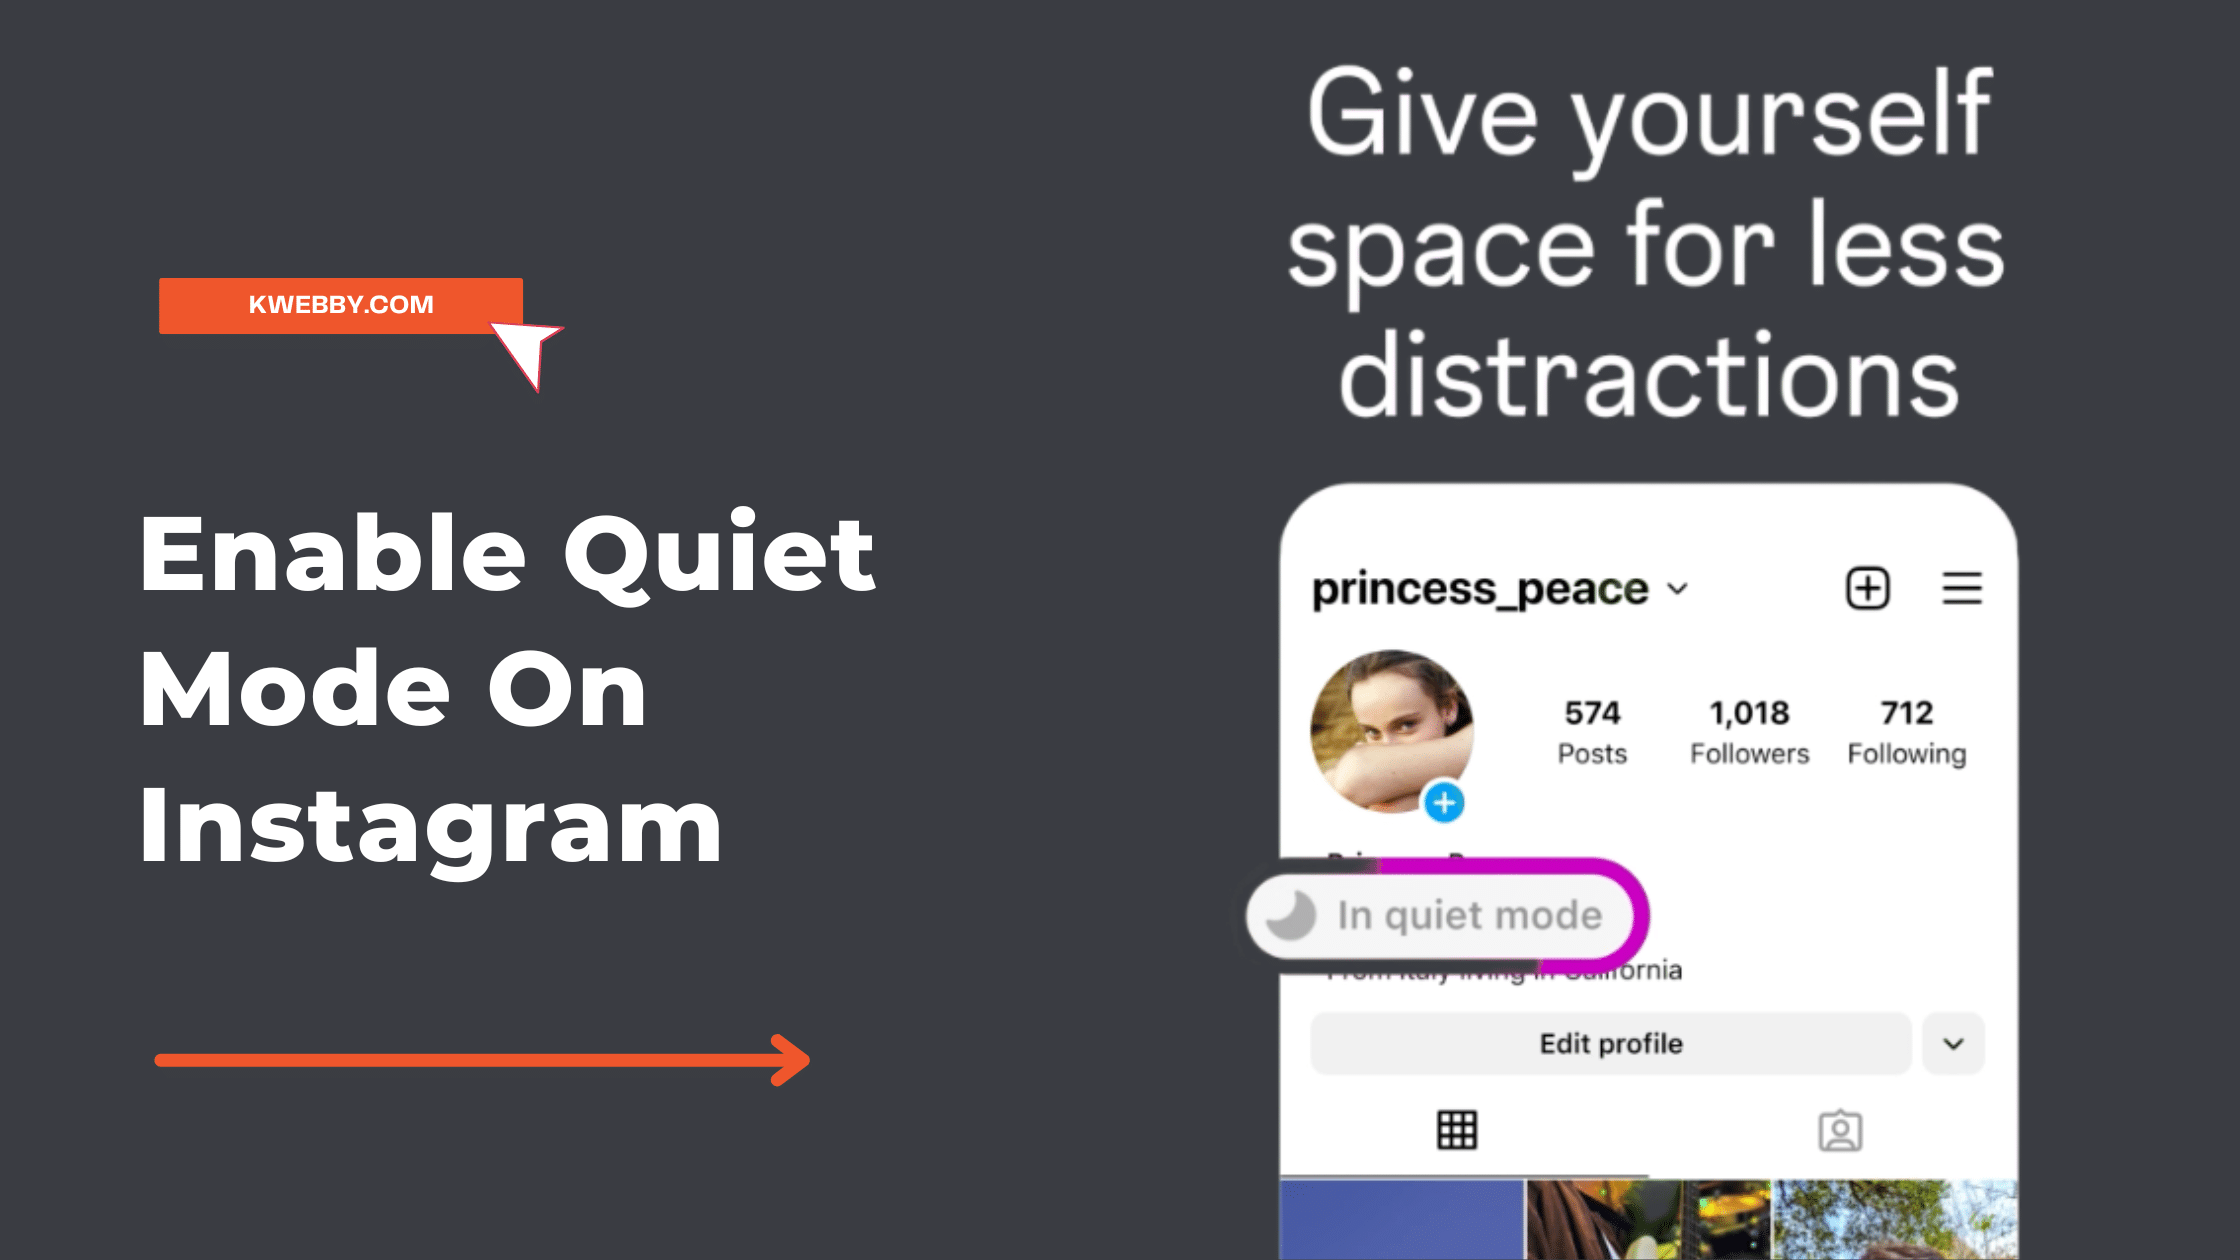 How to Enable Quiet Mode On Instagram in 2 clicks?